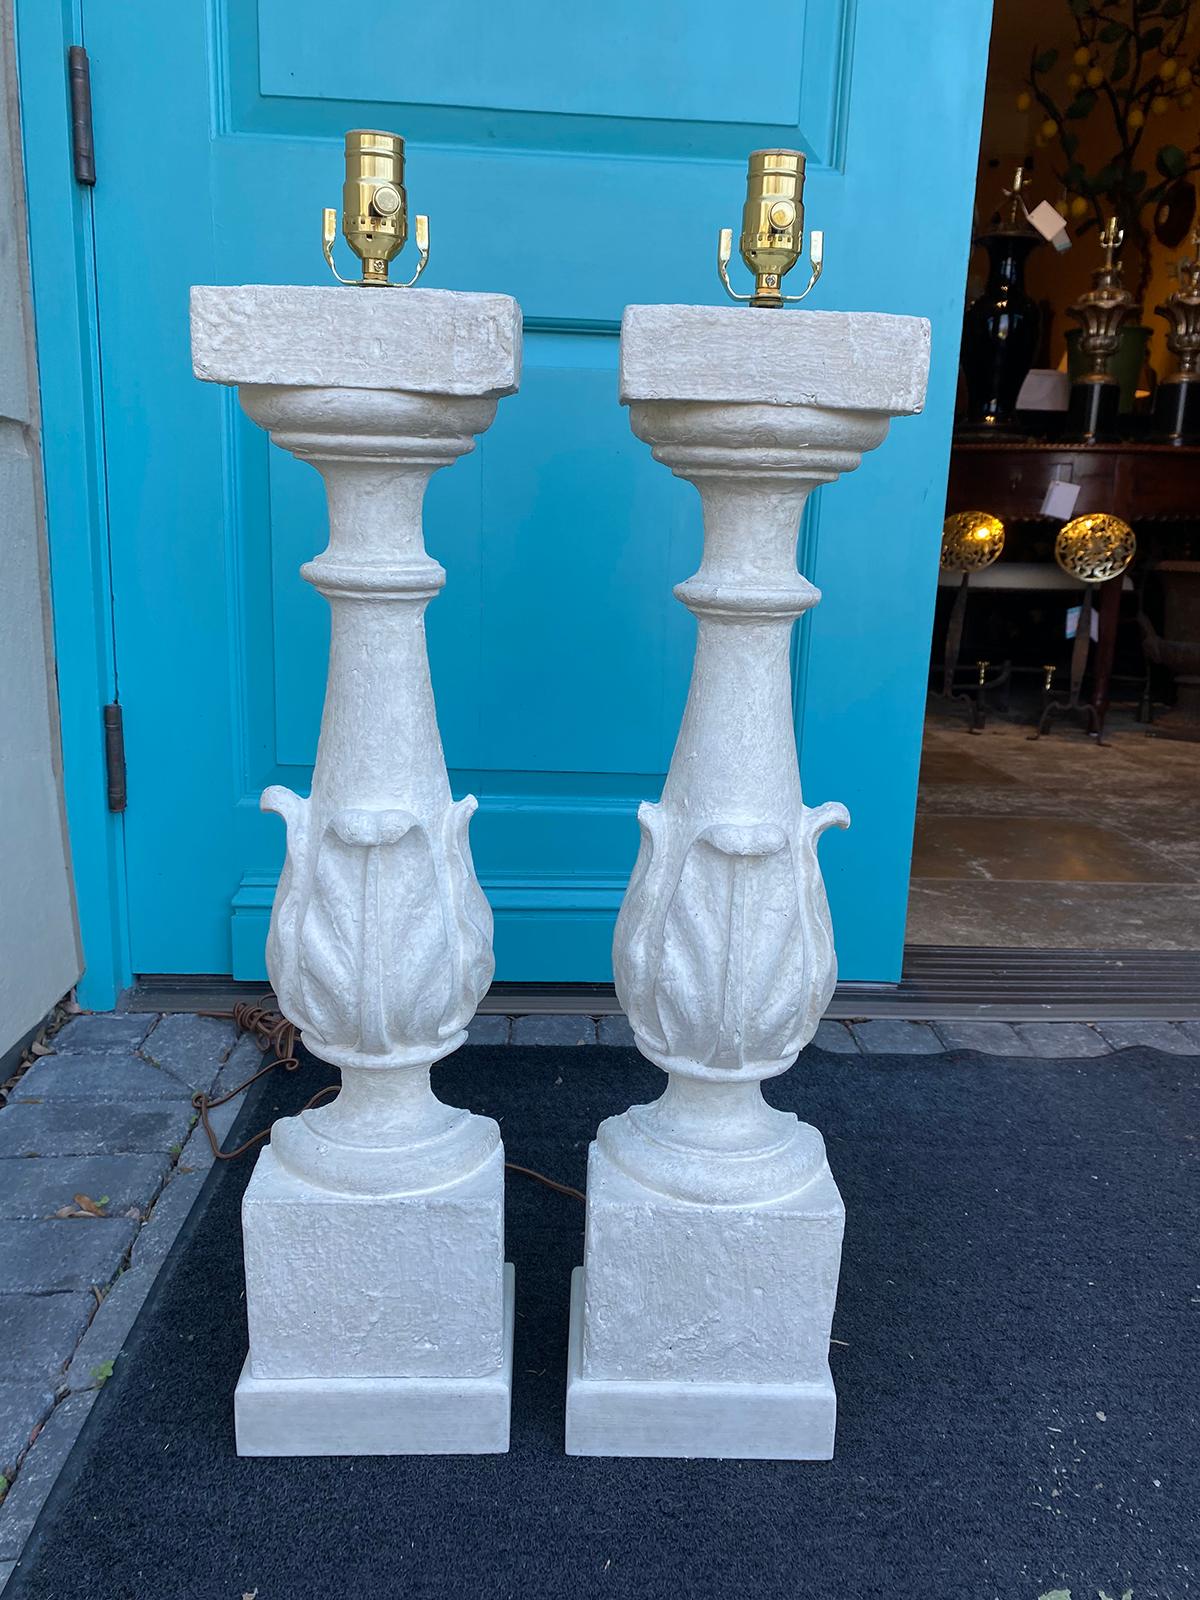 Pair of 19th-20th century painted balustrades as lamps, custom finish
New wiring.